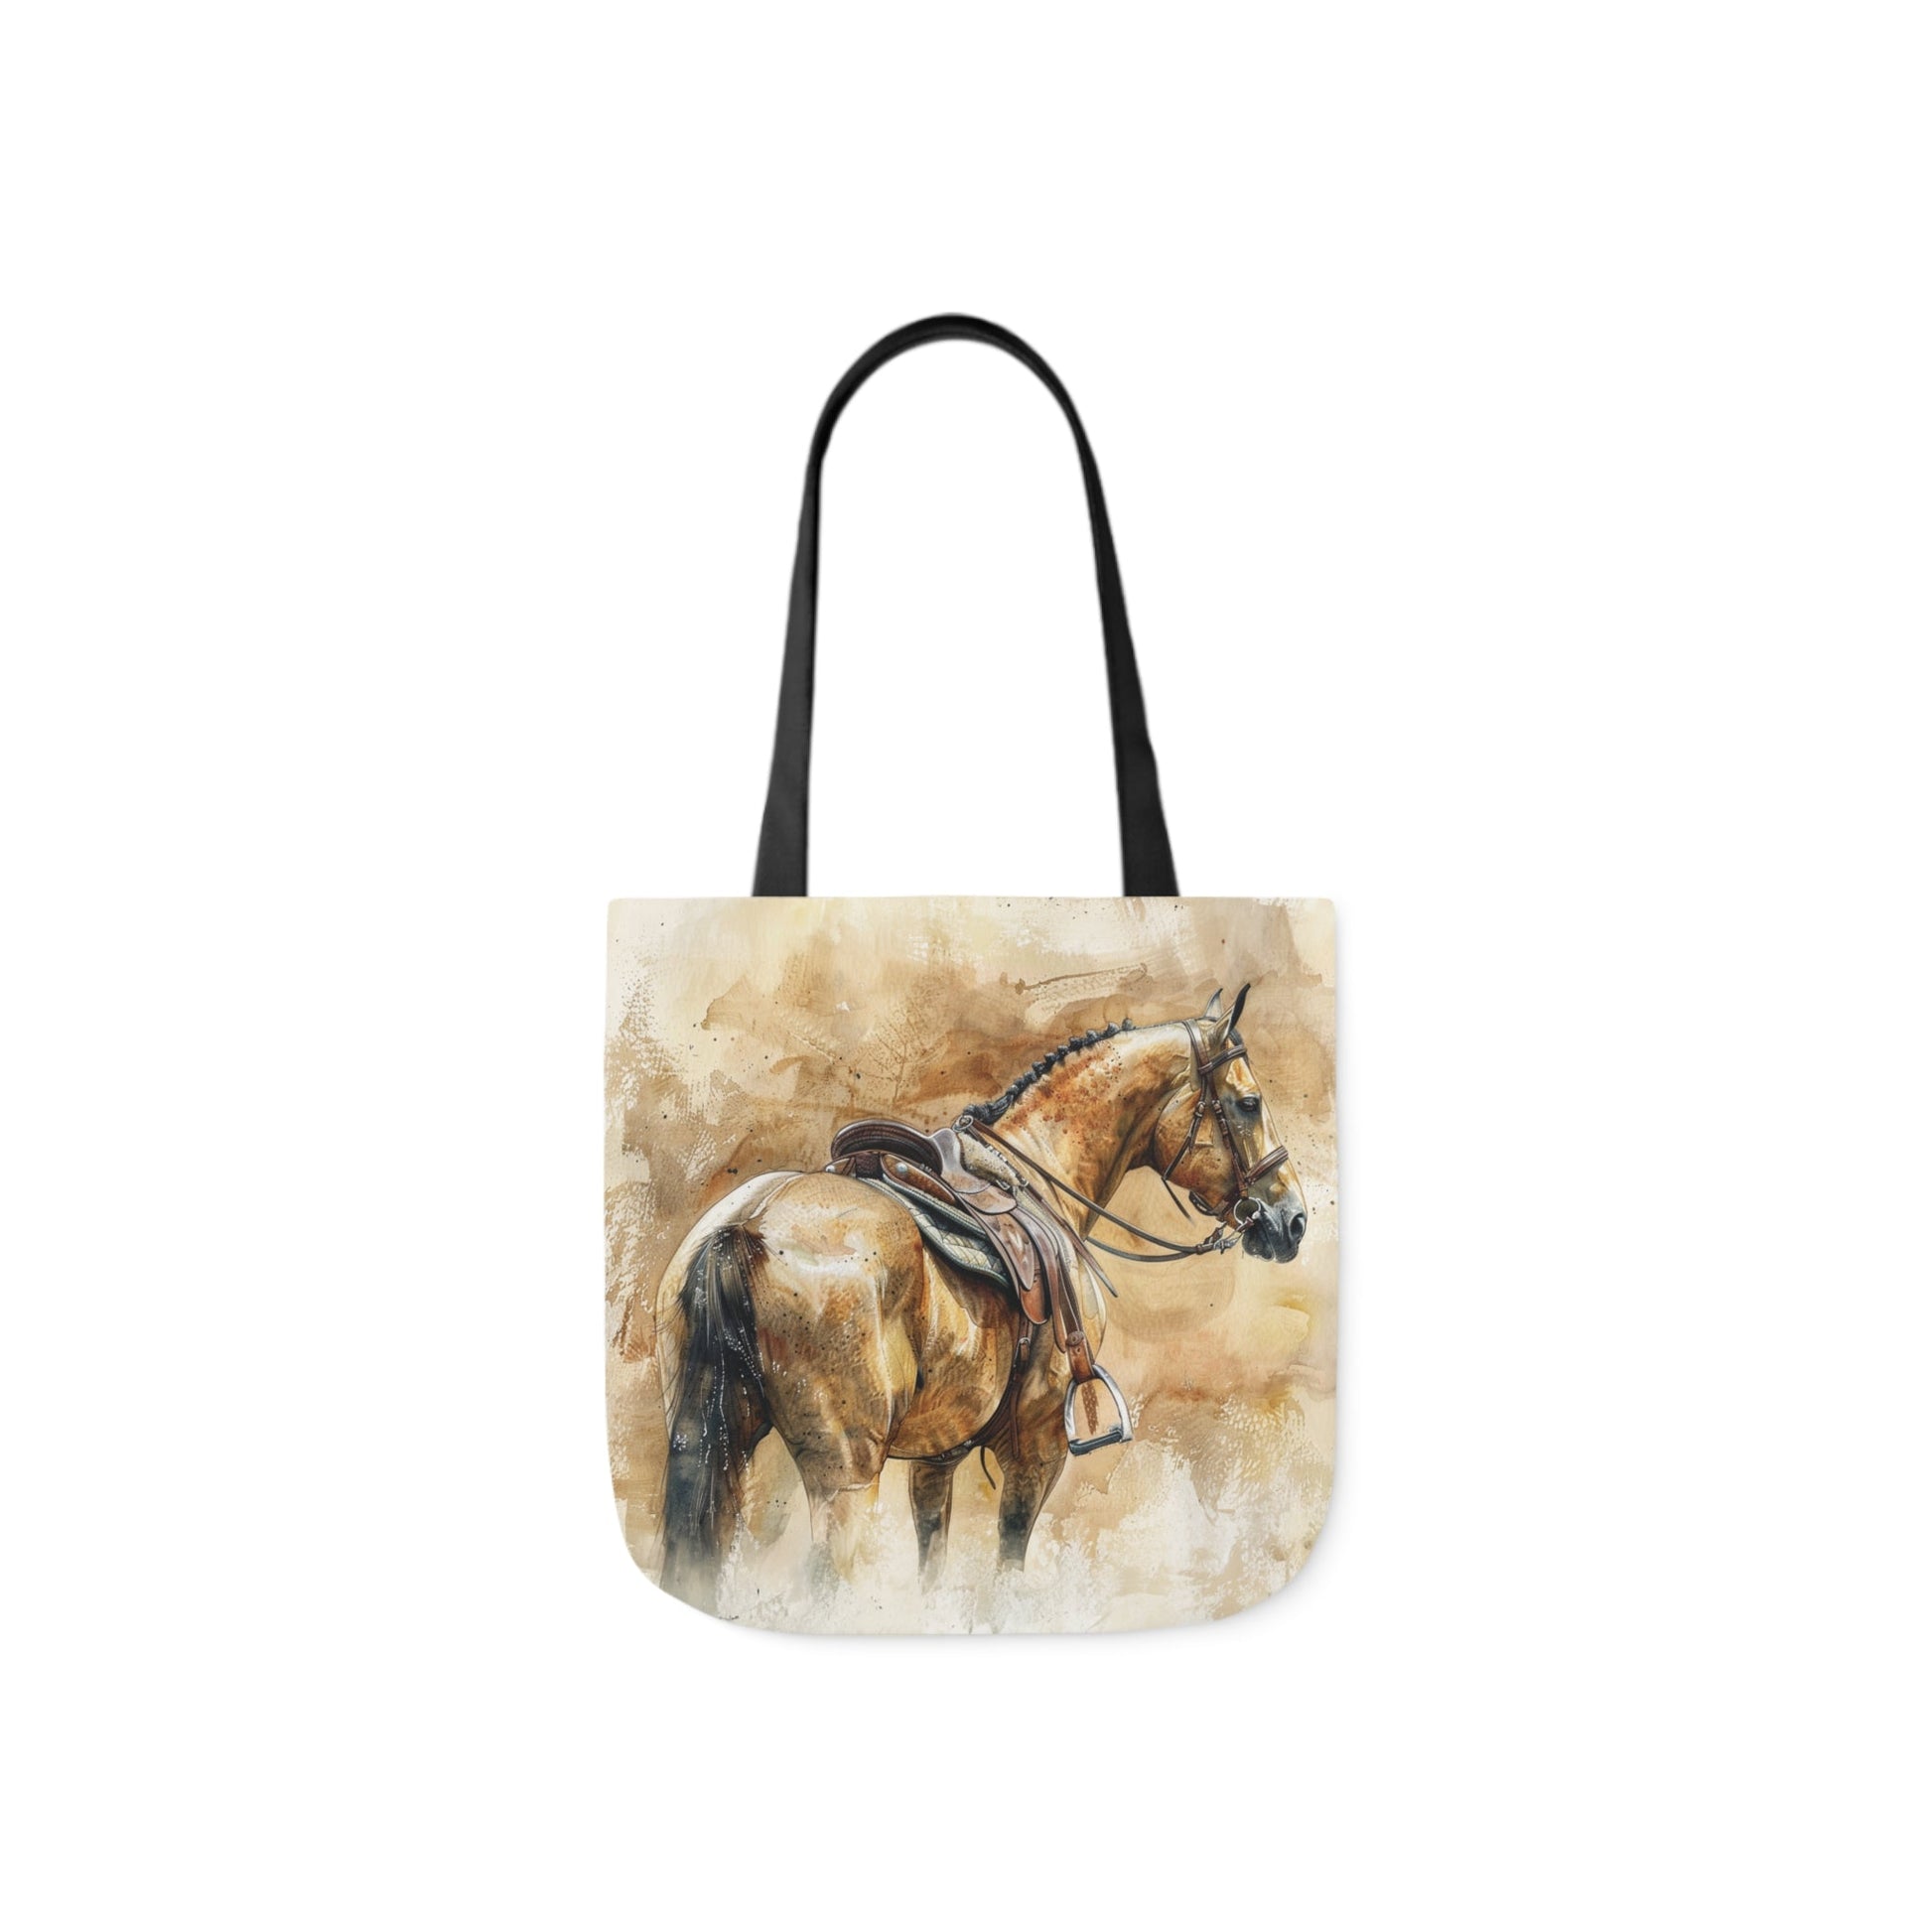 Personalized English Horse Tote Bag, Beautiful Watercolor Horse Art on a Carry All Tote Bag - FlooredByArt